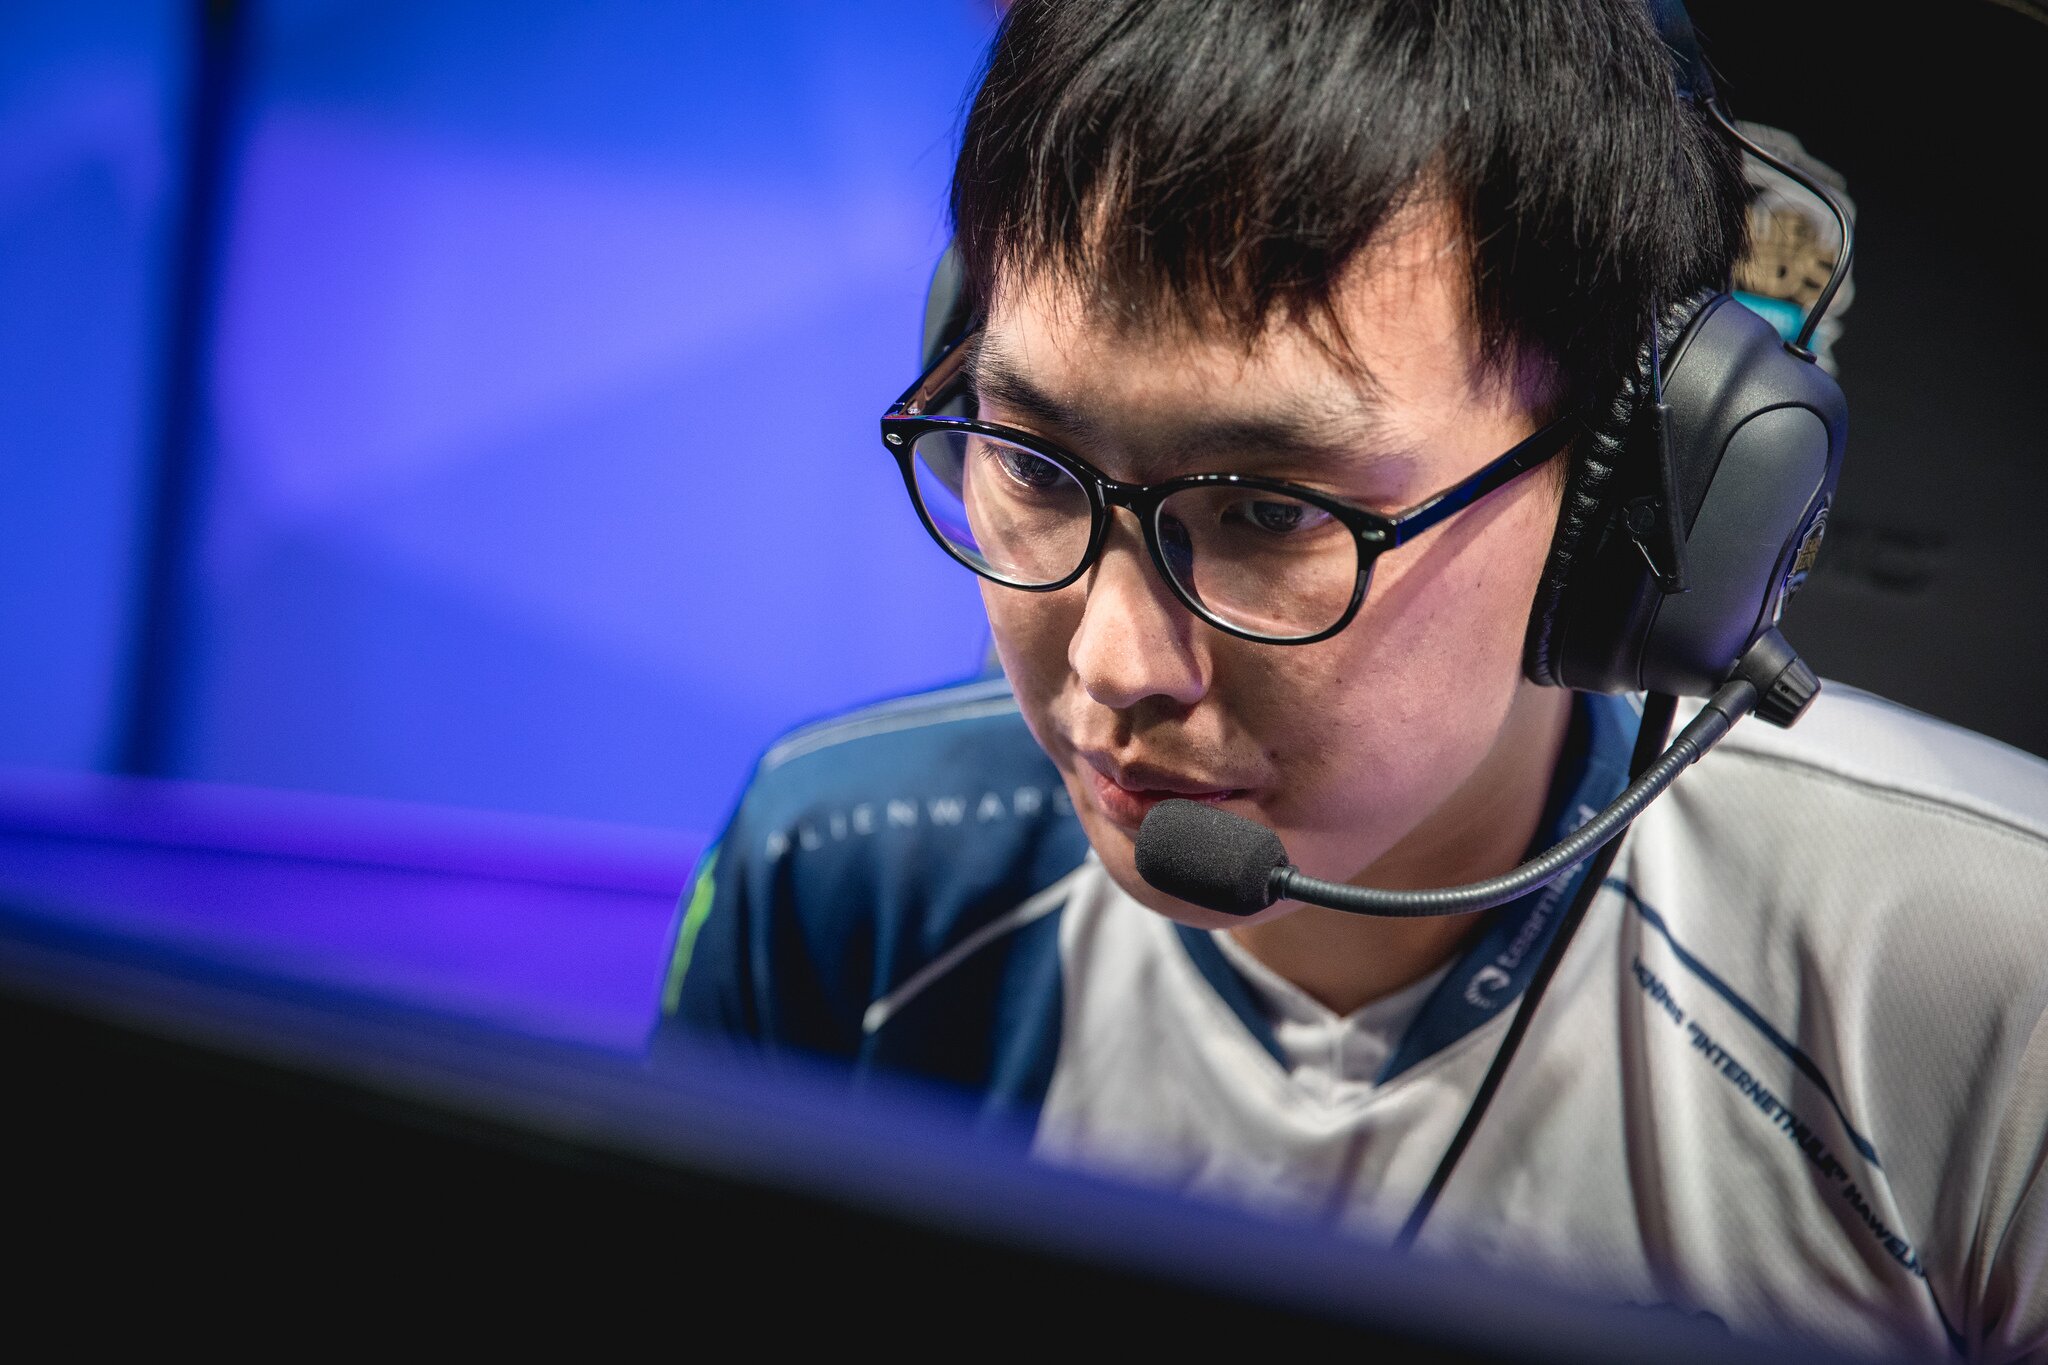 Team Liquid’s star Yiliang “Doublelift” Peng woke up one morning and saw that his Coinbase account withdrew $200,000 in cryptocurrency. (Photo courtesy of Riot Games)